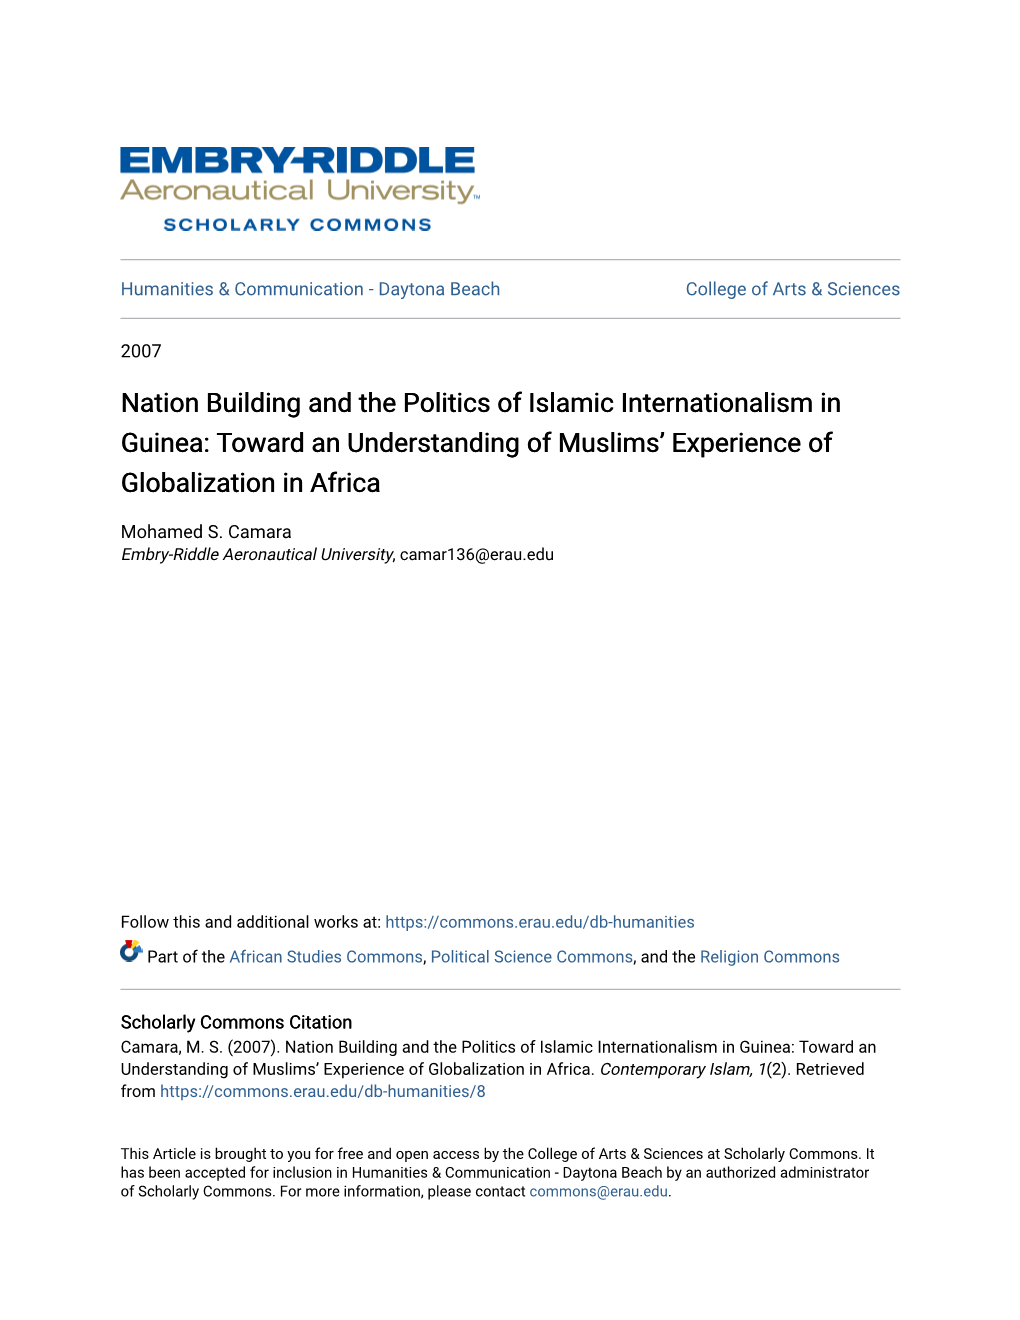 Nation Building and the Politics of Islamic Internationalism in Guinea: Toward an Understanding of Muslims’ Experience of Globalization in Africa